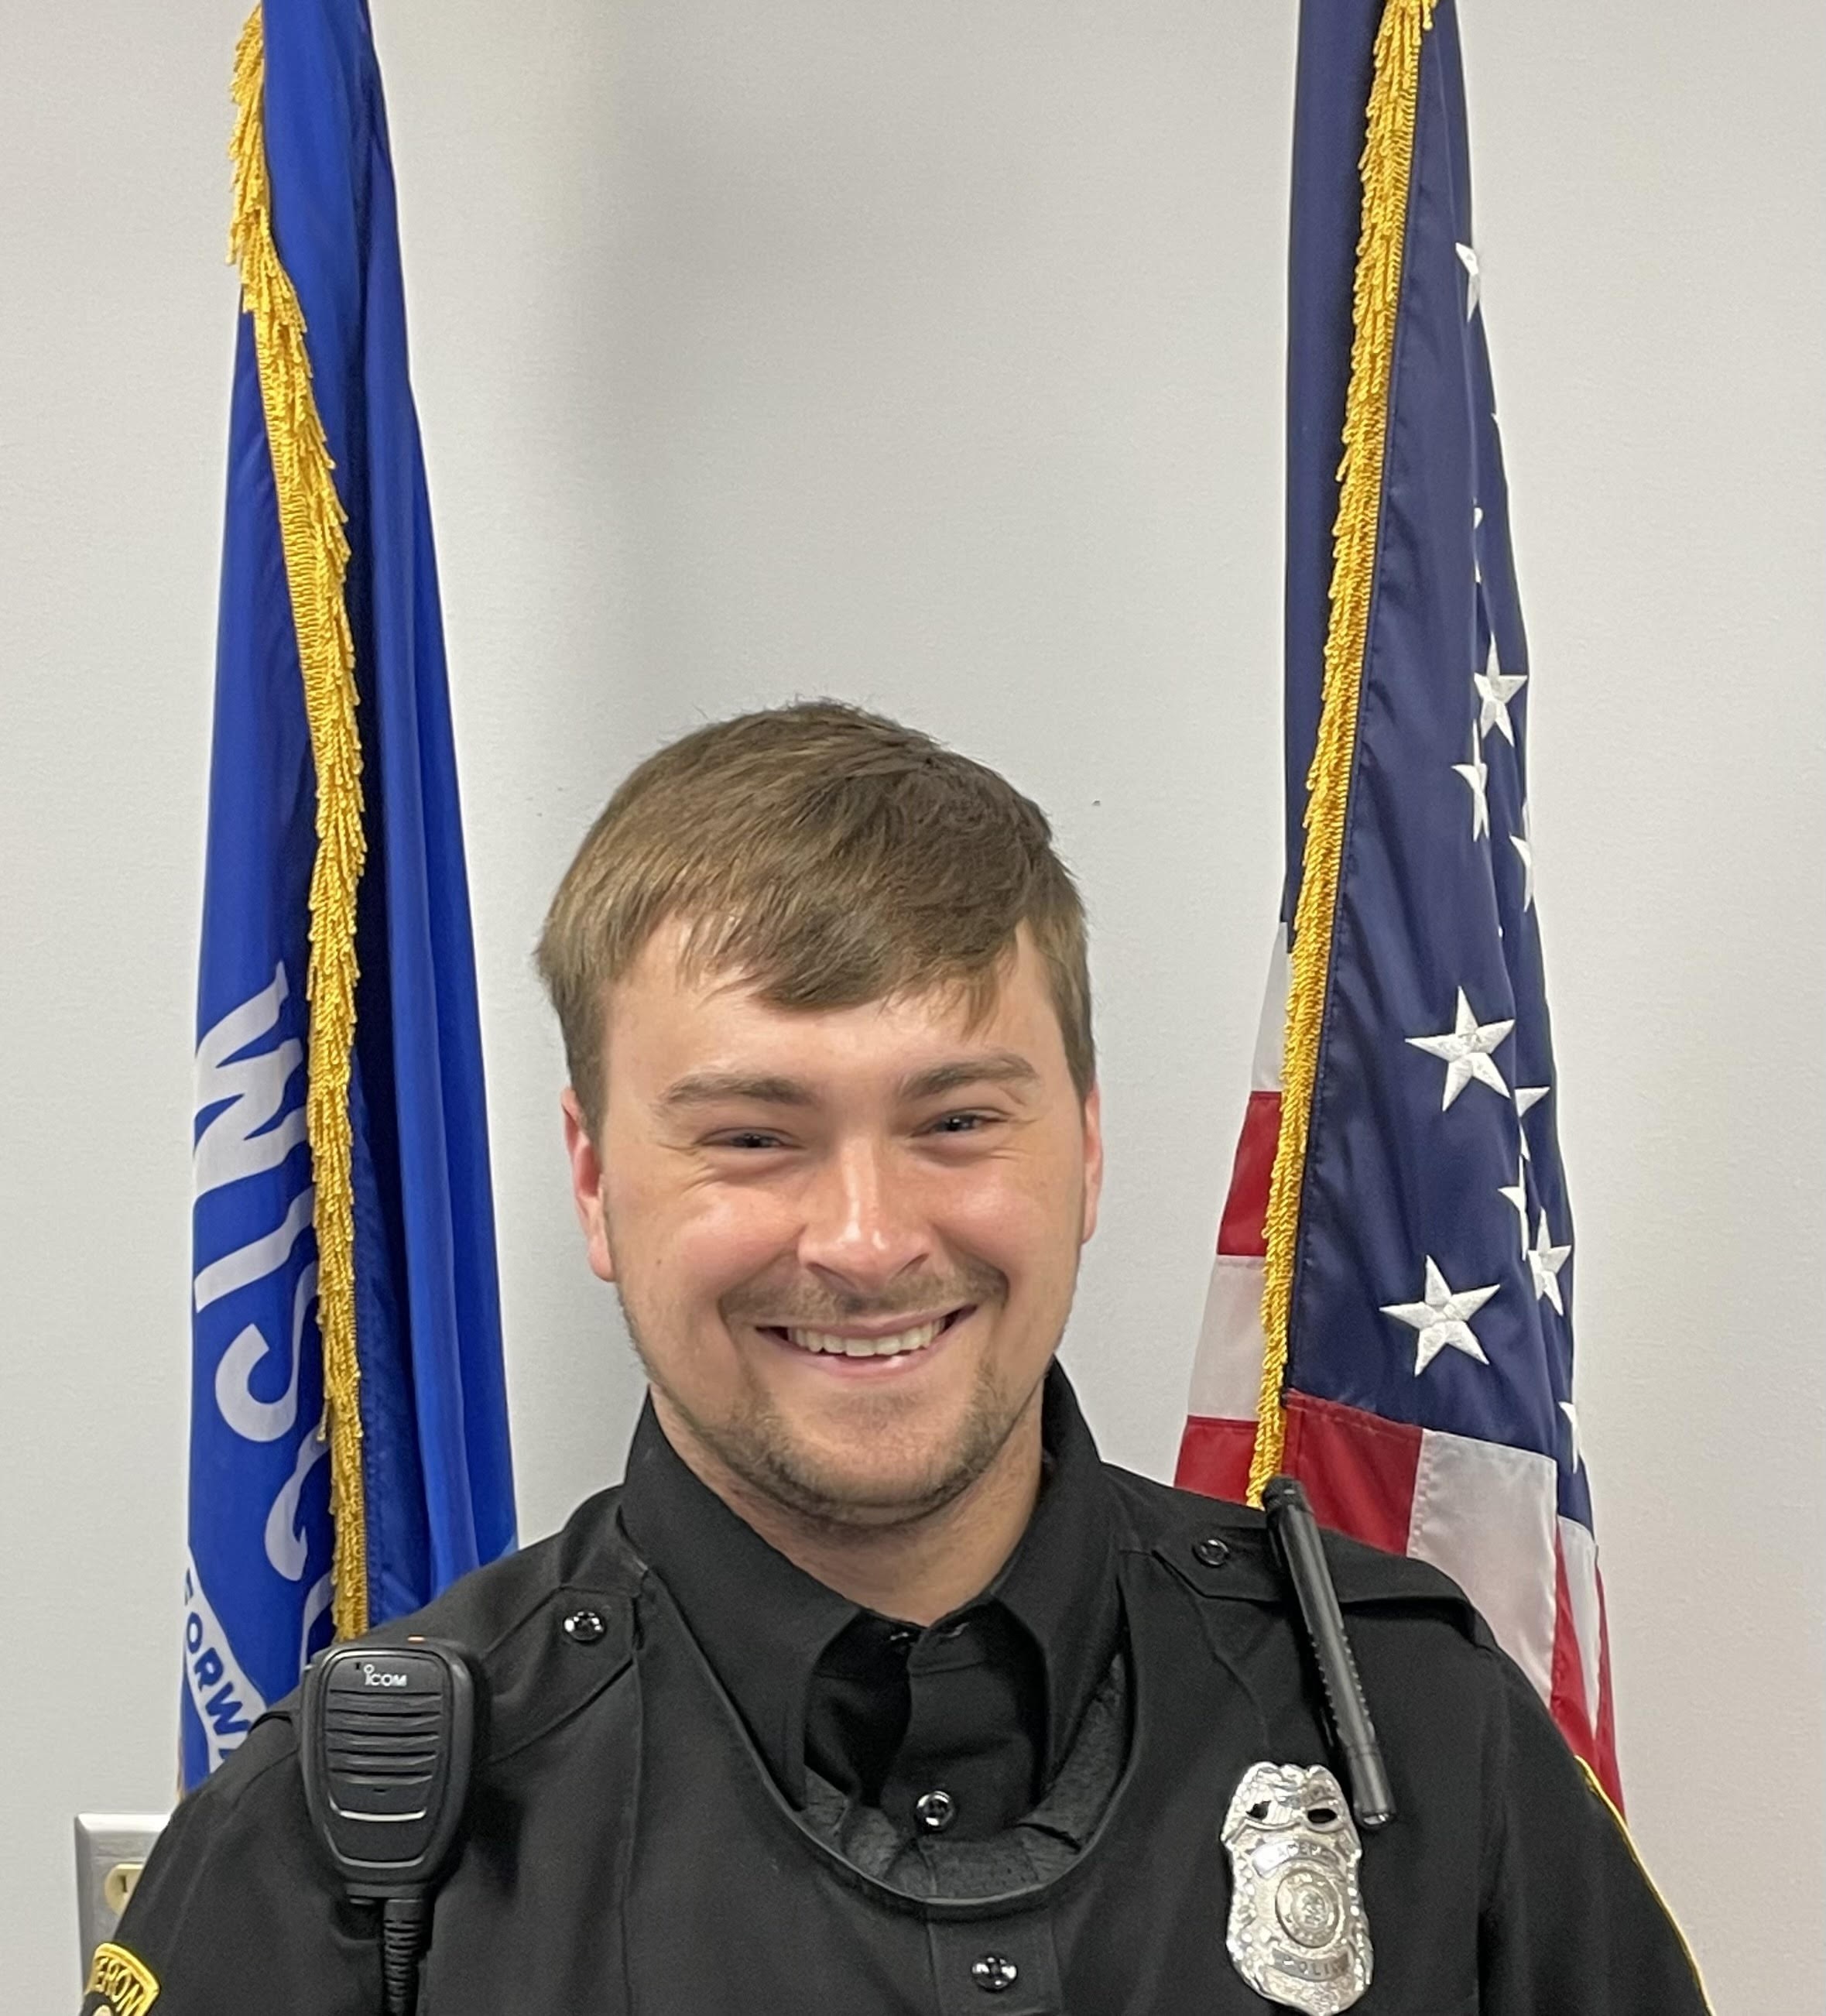 Police Officer Hunter Timothy Scheel | Cameron Police Department, Wisconsin